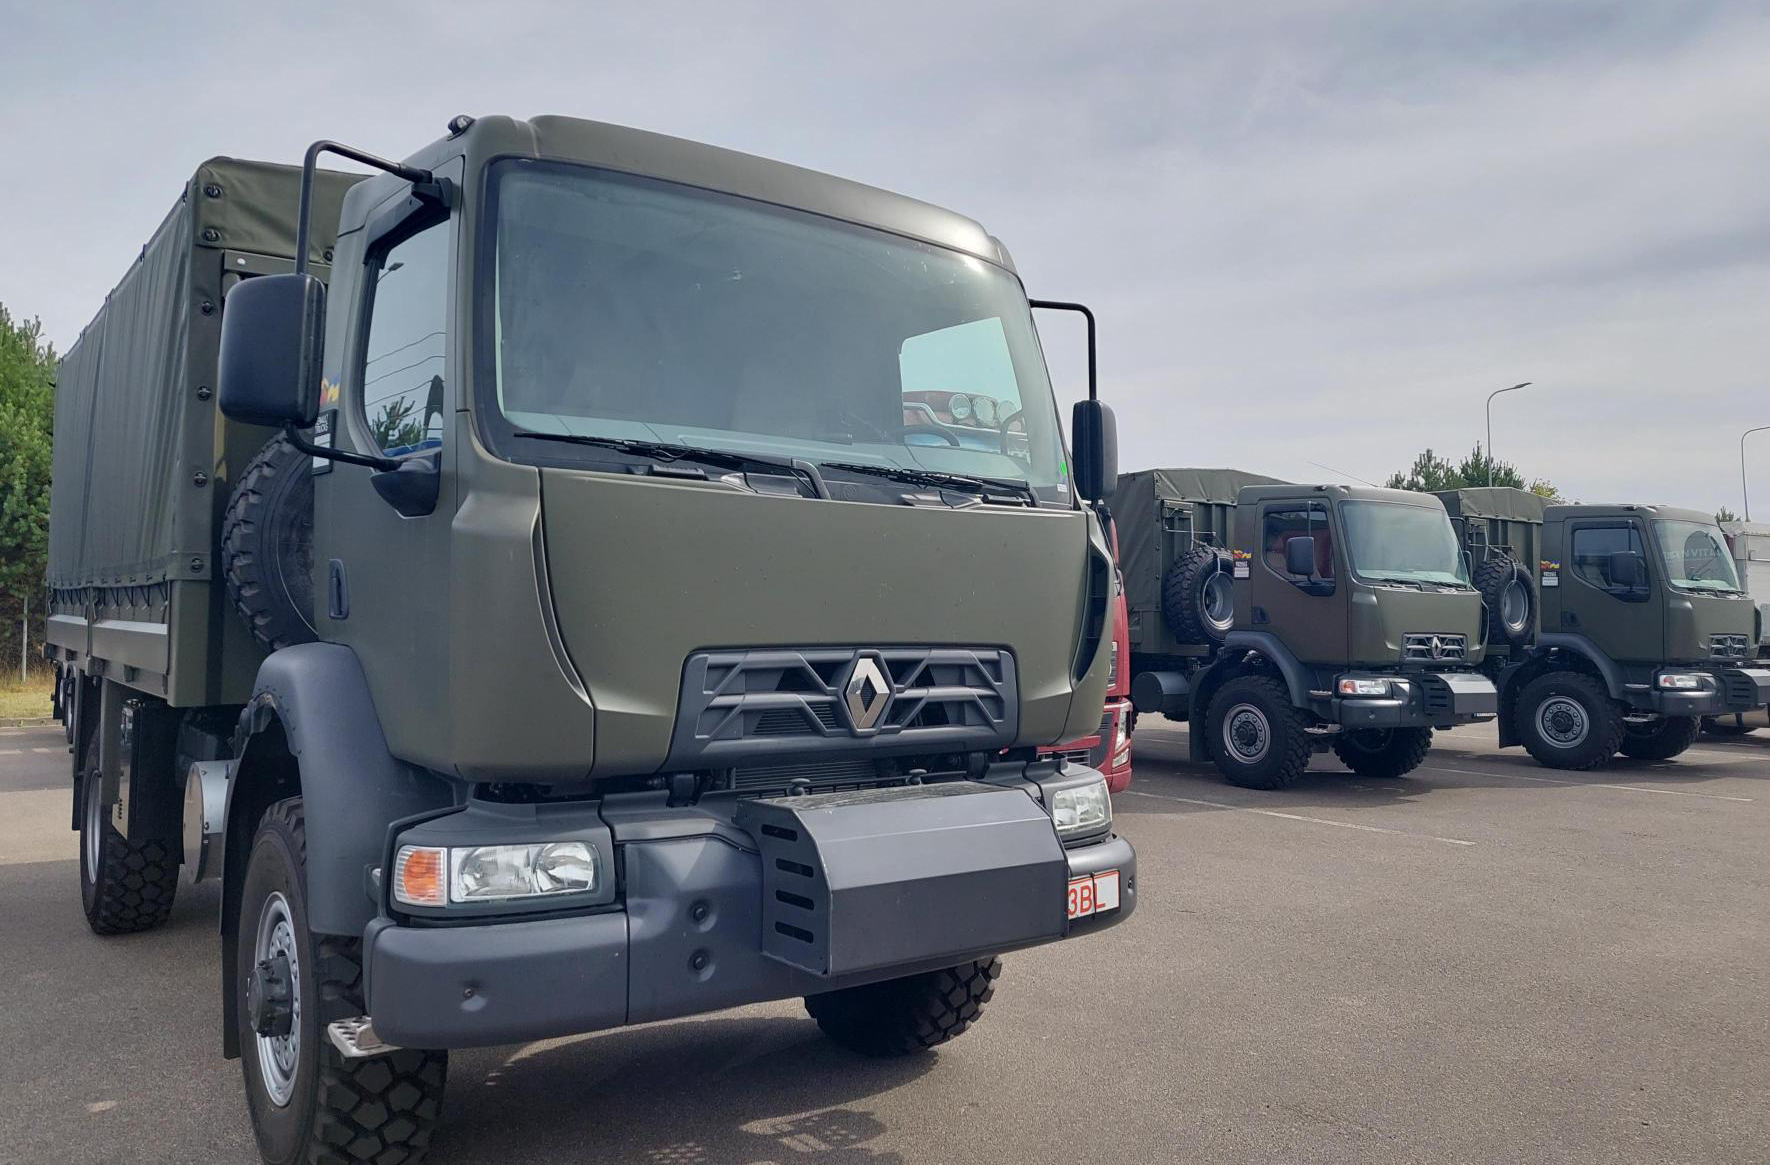 The European Union hands over 16 Renault trucks to the Armed Forces of Ukraine - Militarnyi